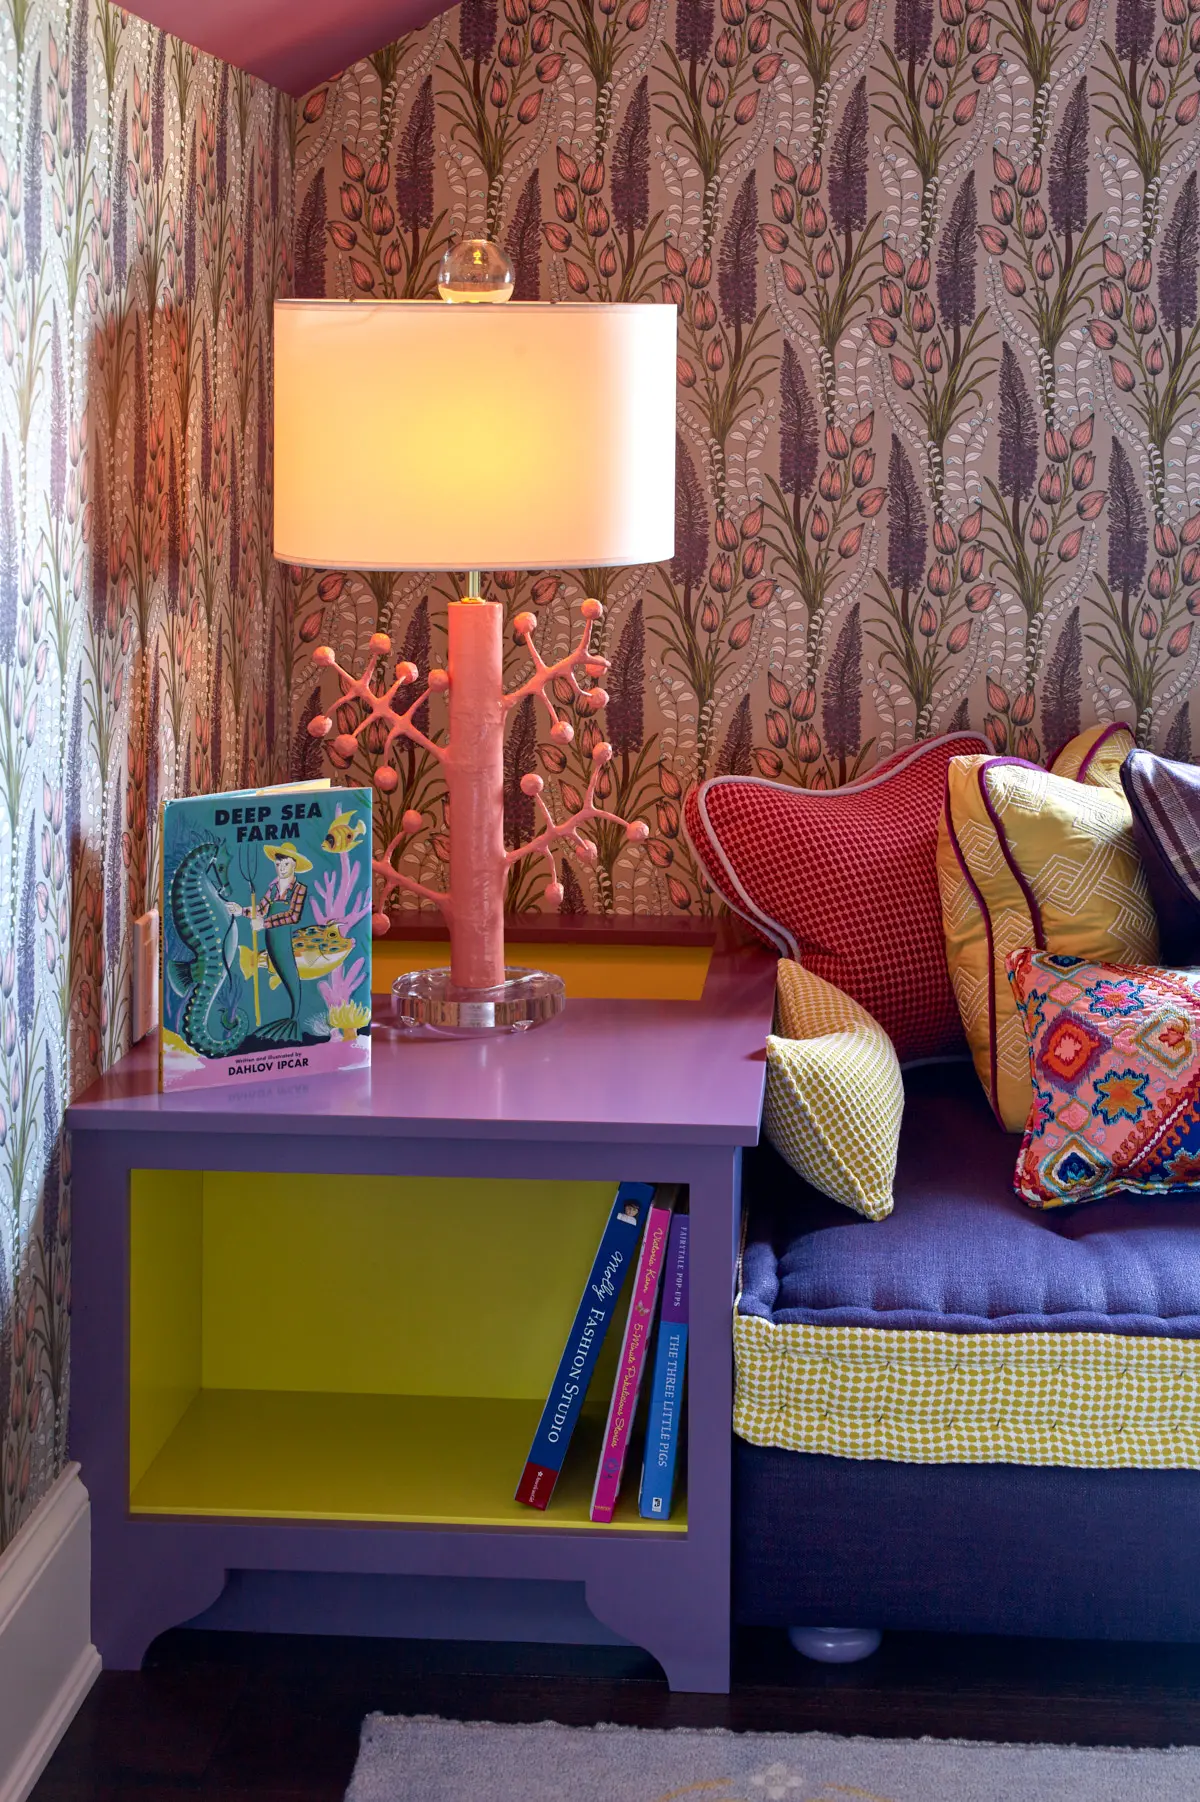 This reading nook sparks imagination with unique wallpaper and coral-inspired light fixture.